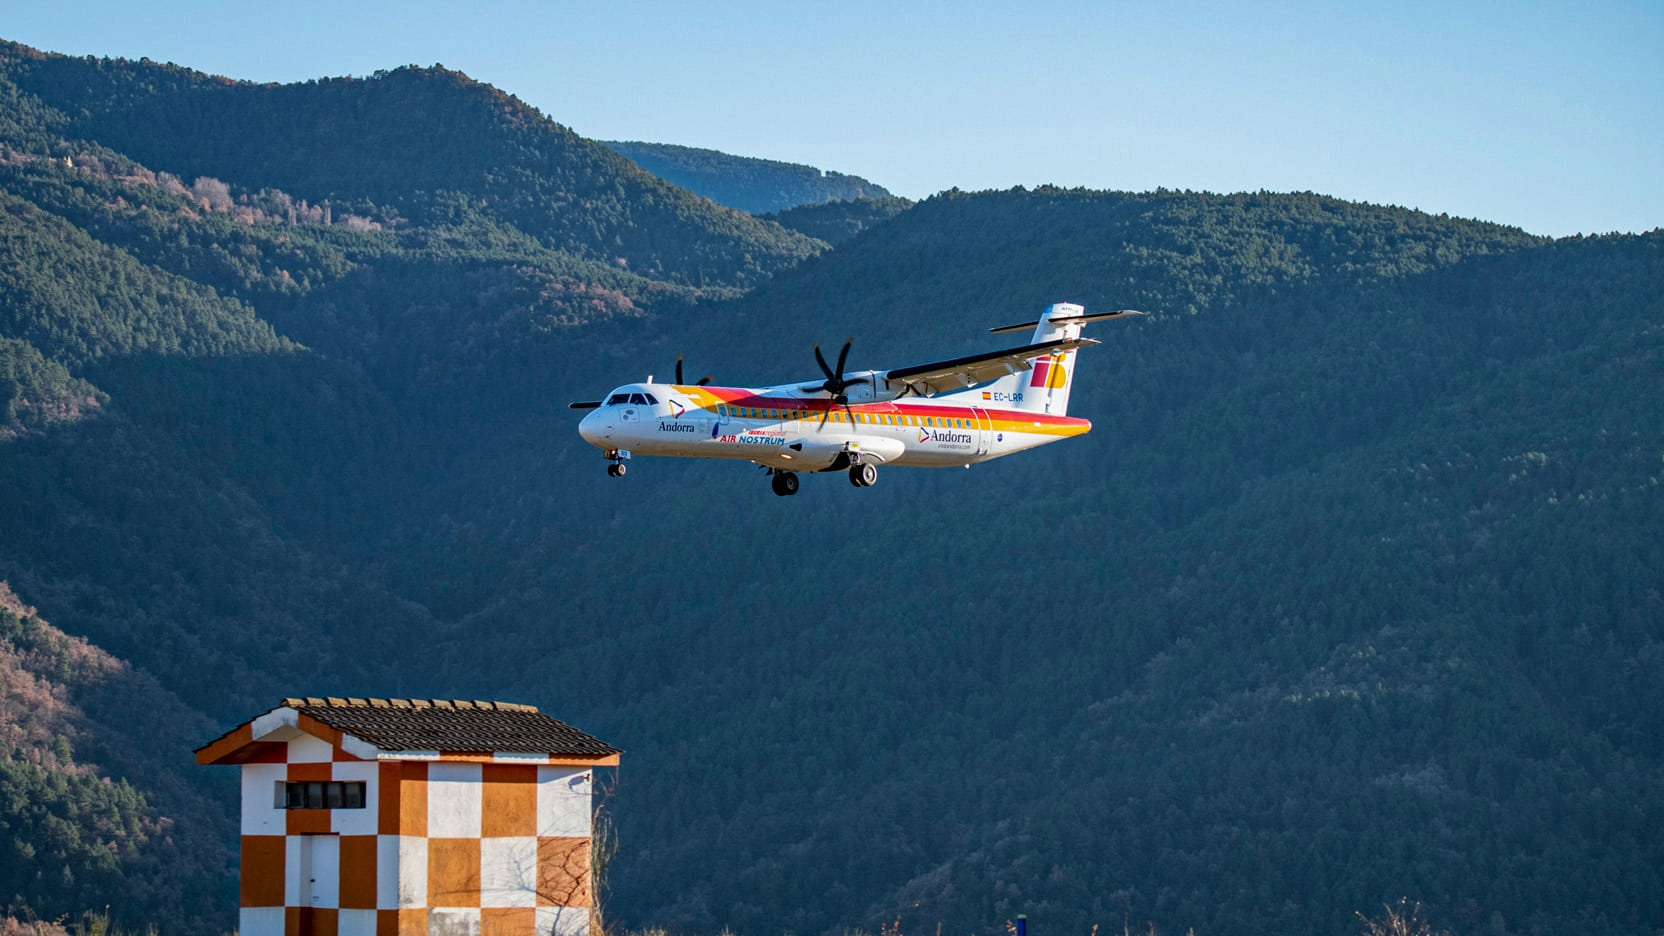 Book Flights to Andorra: Fly from UK